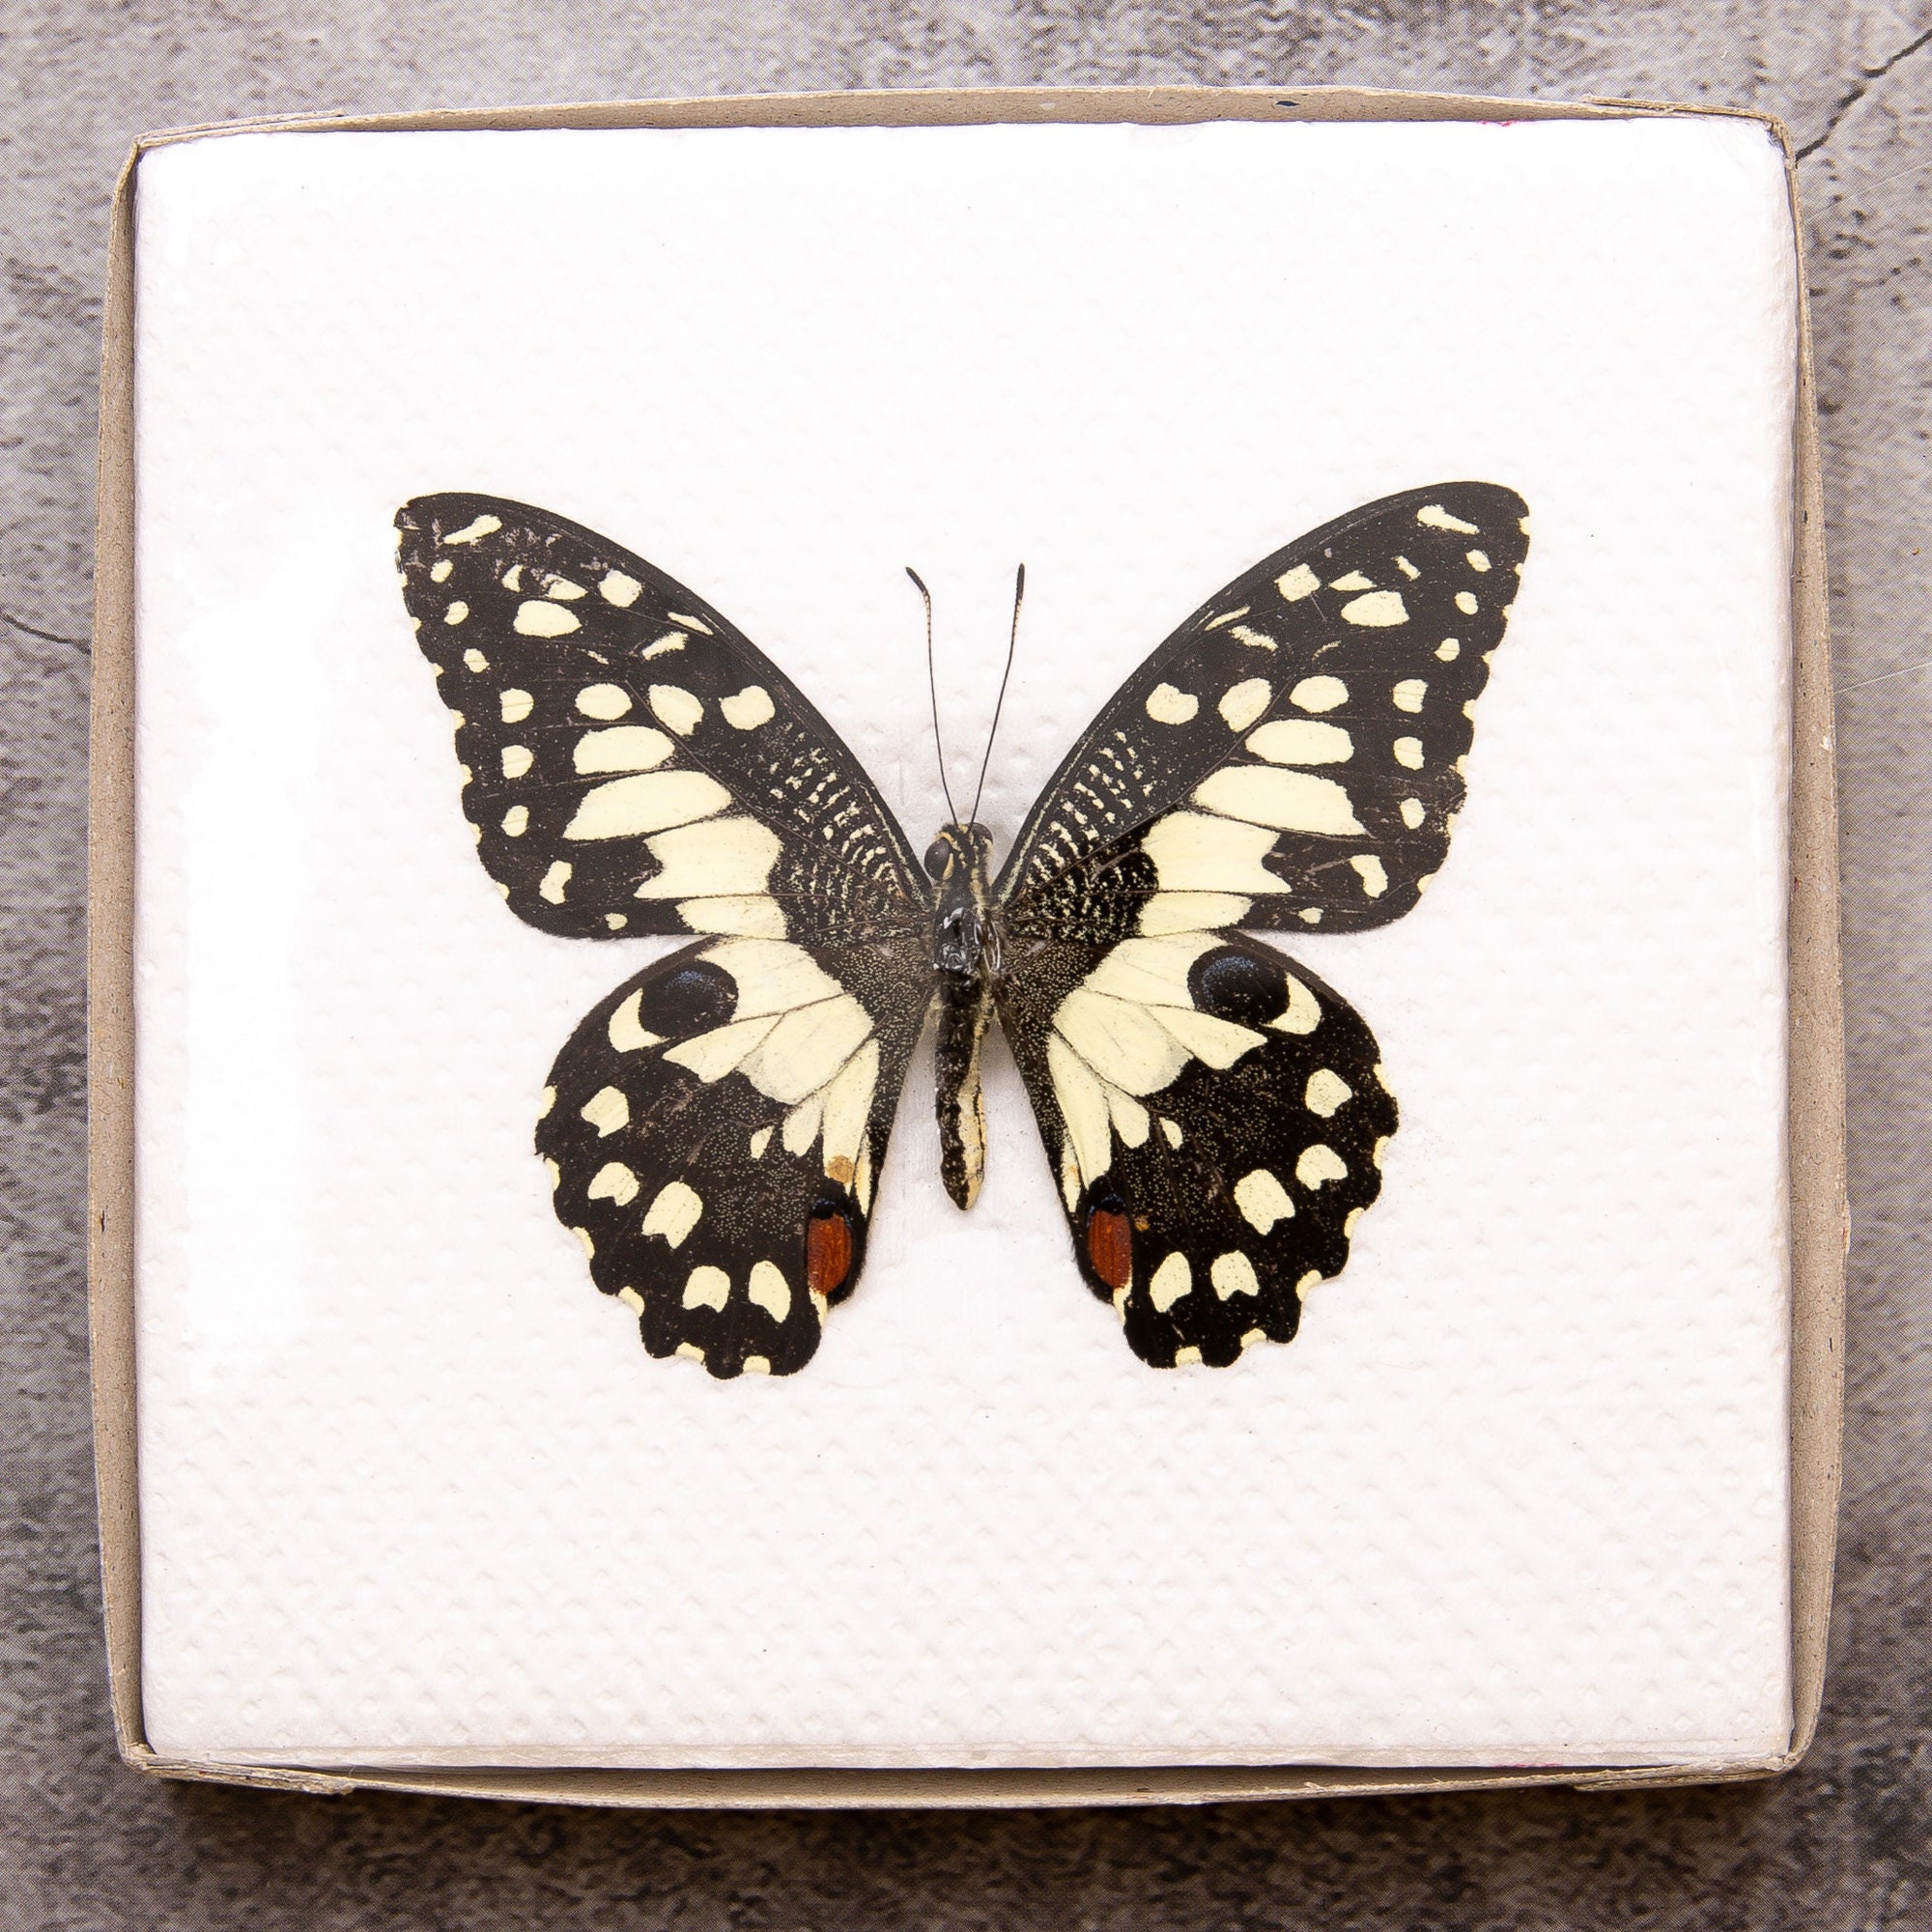 Pack of 2 Lime Butterflies (Papilio demoleus) WINGS-SPREAD, Ethically Sourced Preserved Specimens for Collecting & Artistic Creation